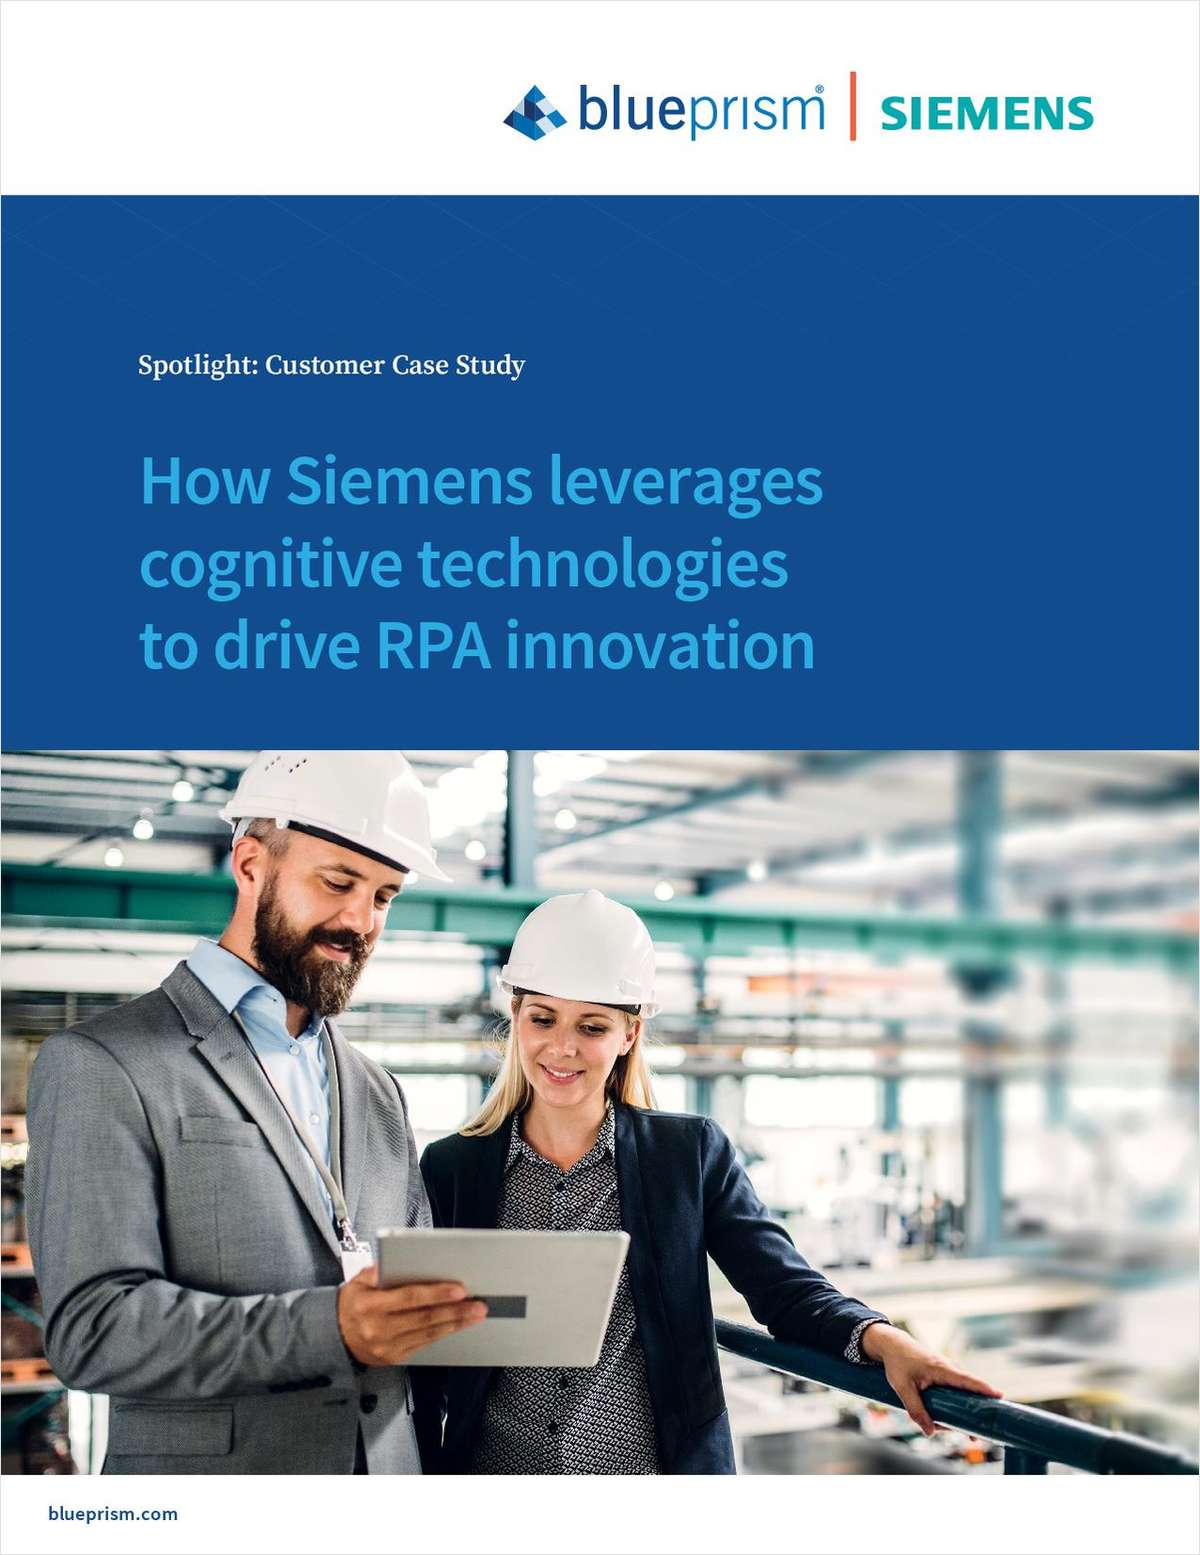 How Siemens leverages cognitive technologies to drive RPA innovation